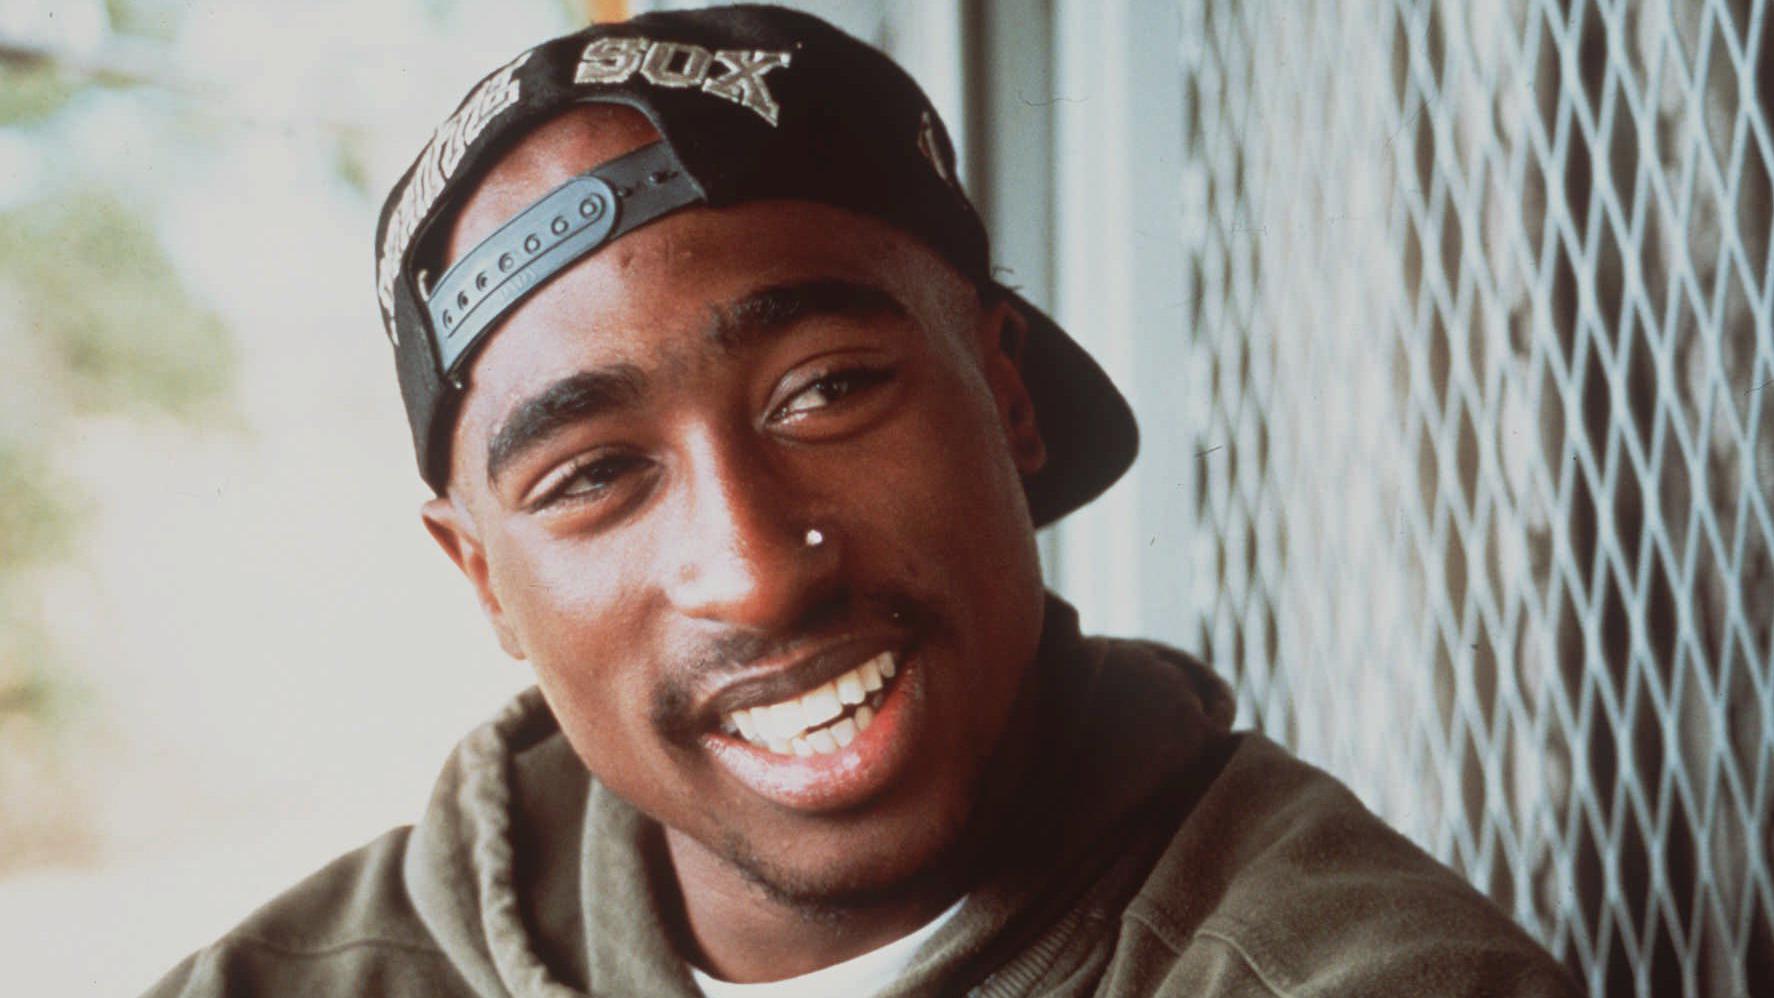 Tupac Shakur’s Erotic Artworks Sold for over $21,000 at Auction